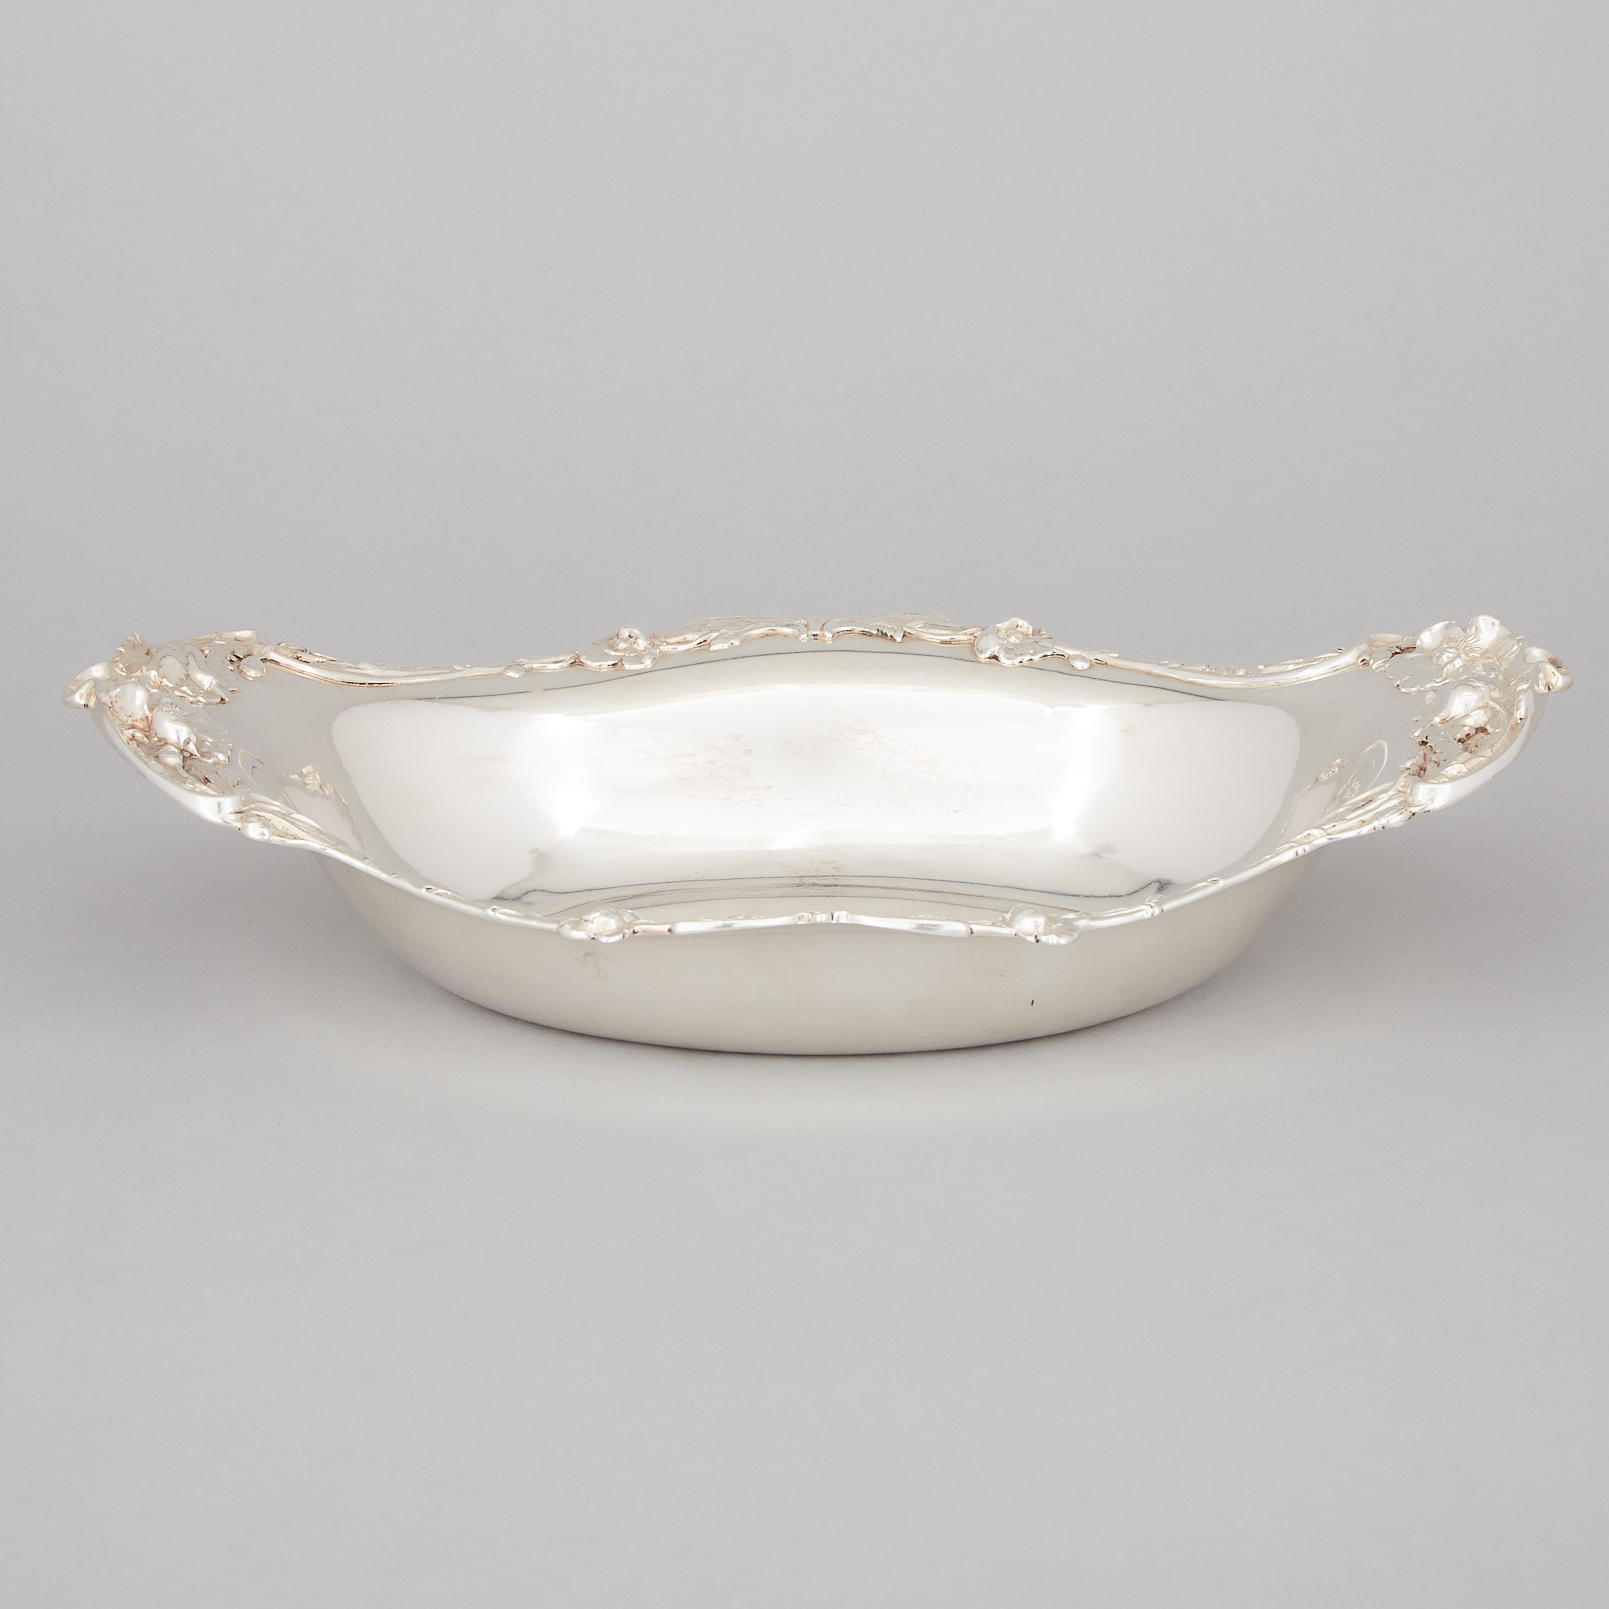 American Silver Oval Berry Bowl, R. Wallace & Sons, Wallingford, Ct., c.1900